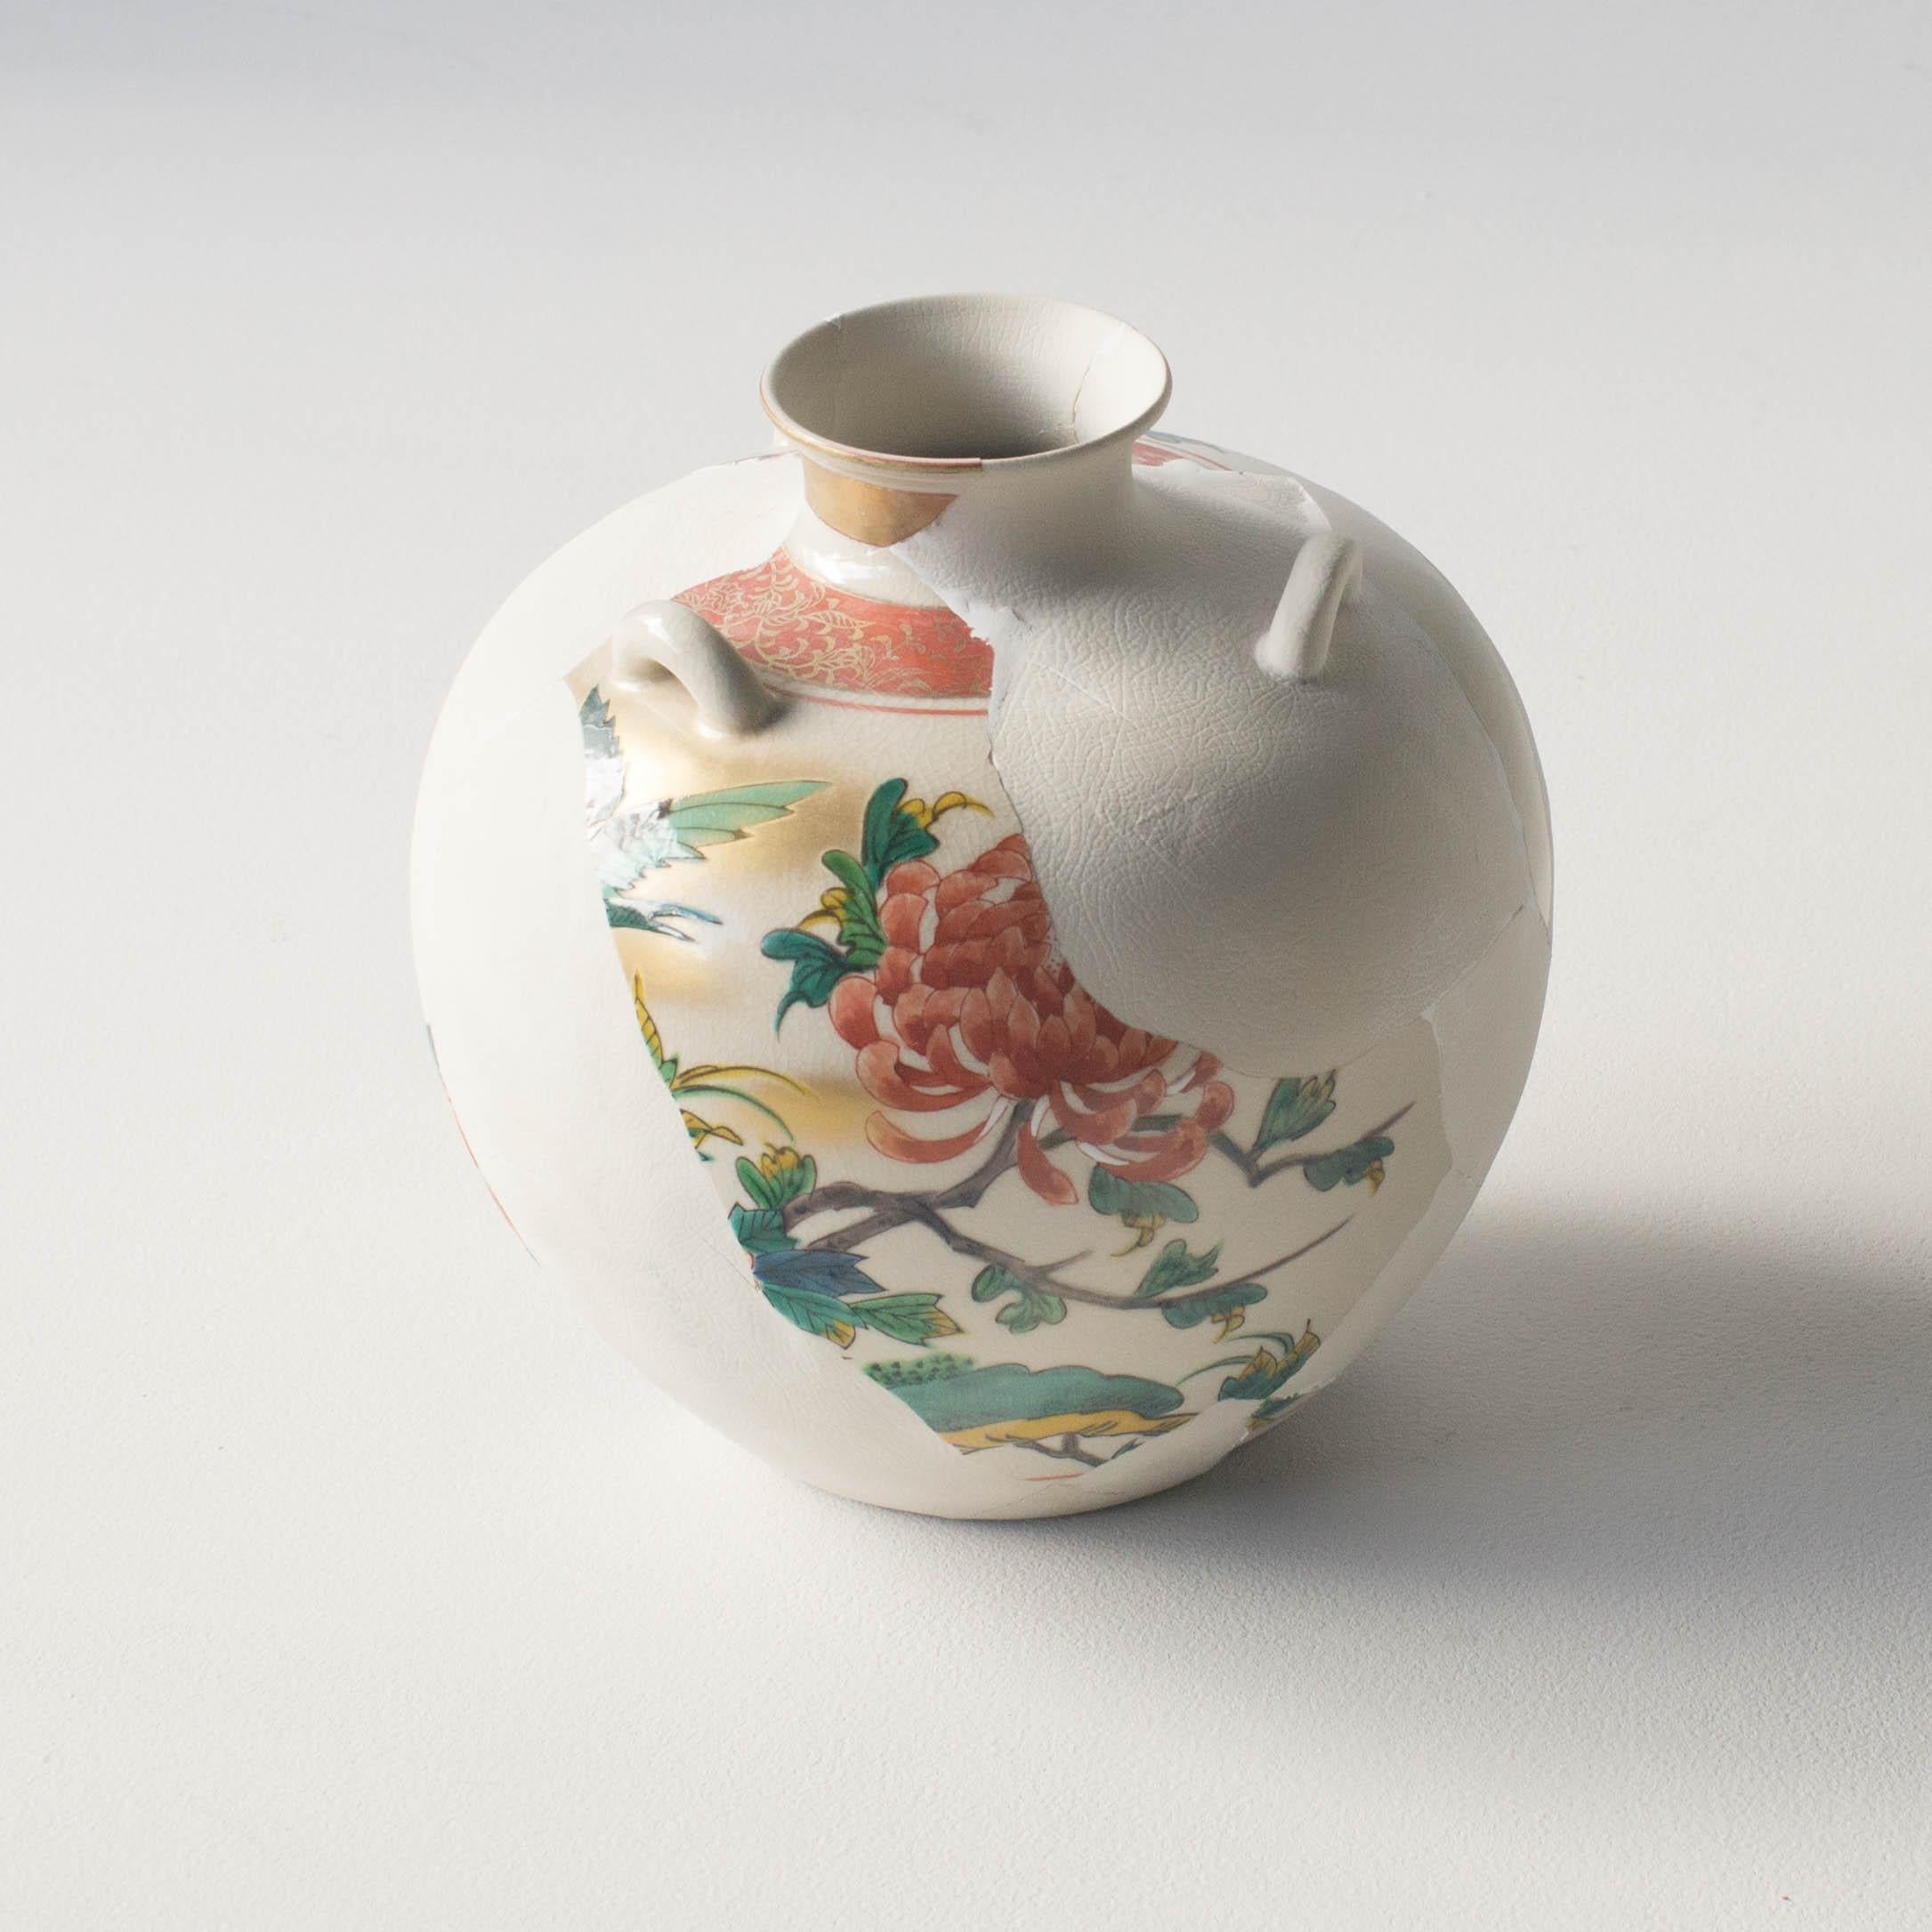 Reconstructed Ceramics #3 Contemporary Zen Japonism Style For Sale 1